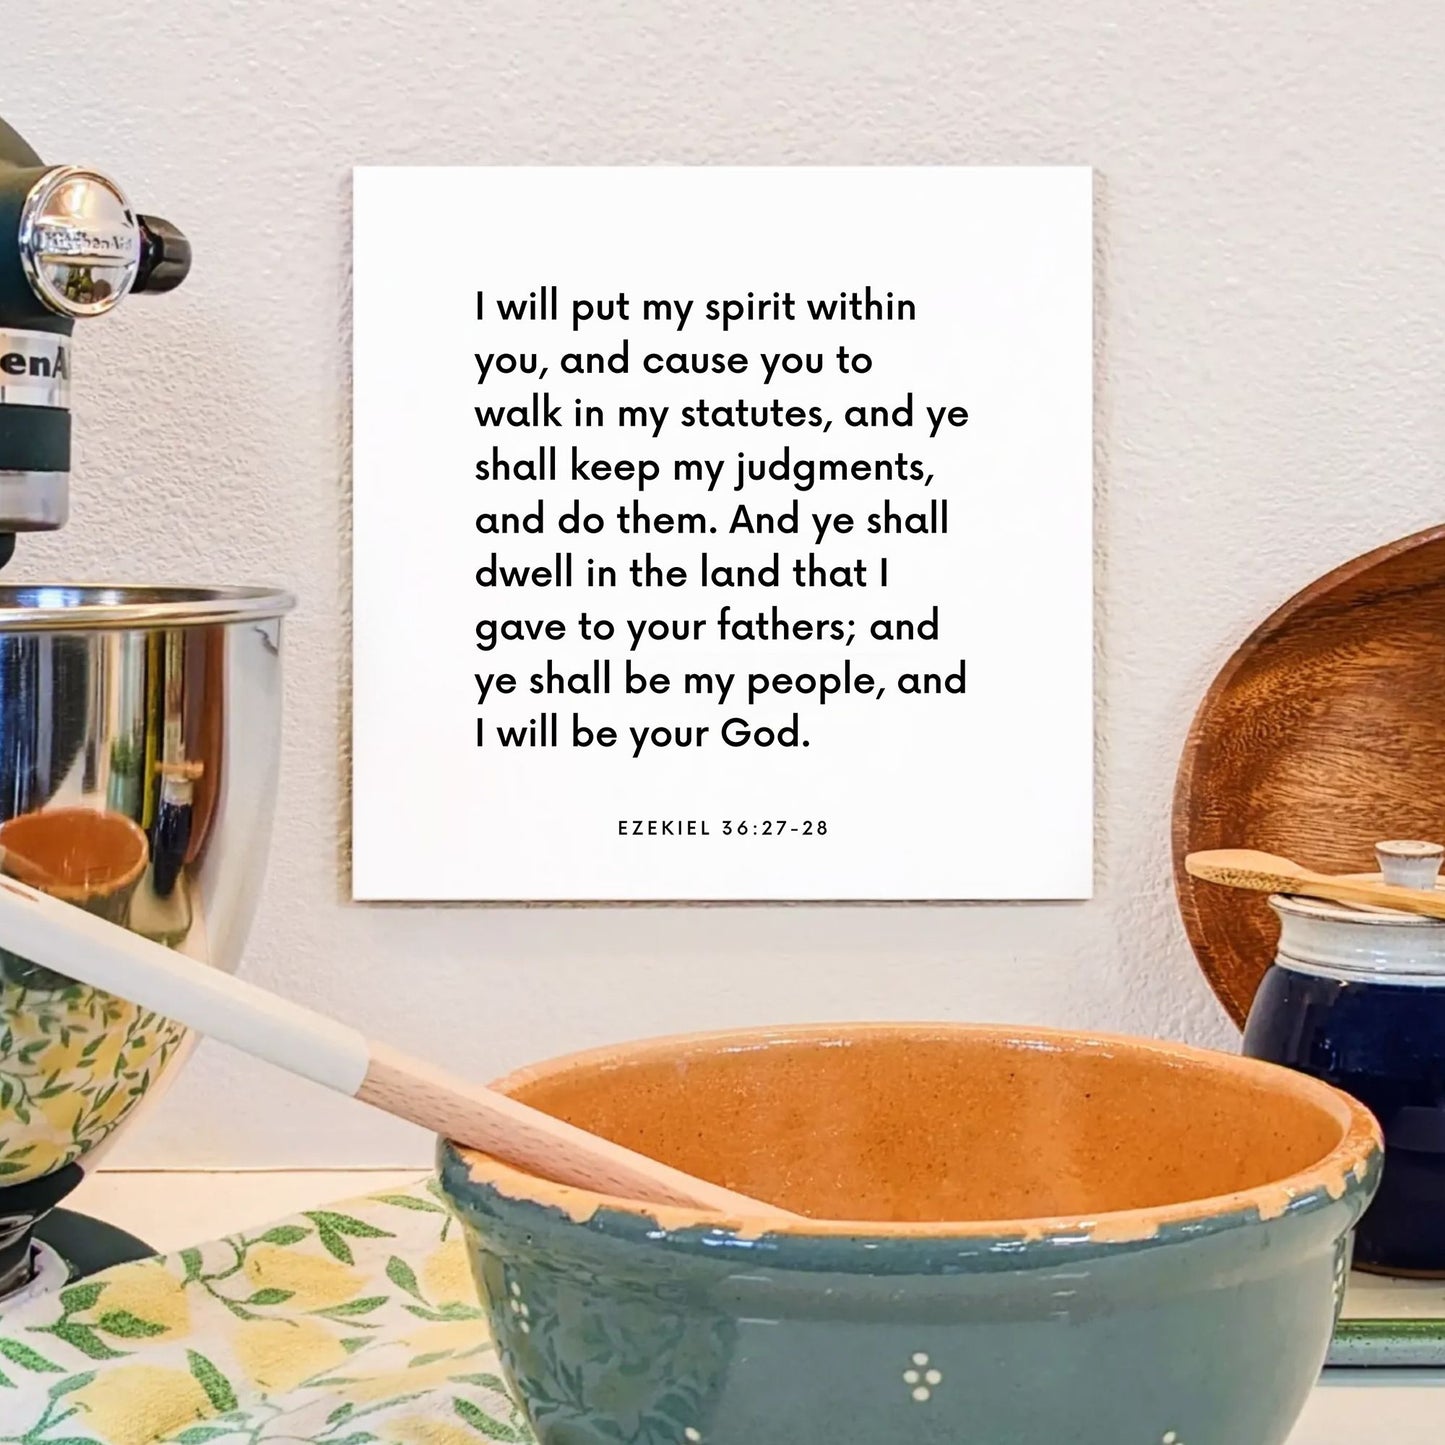 Kitchen mouting of the scripture tile for Ezekiel 36:27-28 - "I will put my spirit within you"